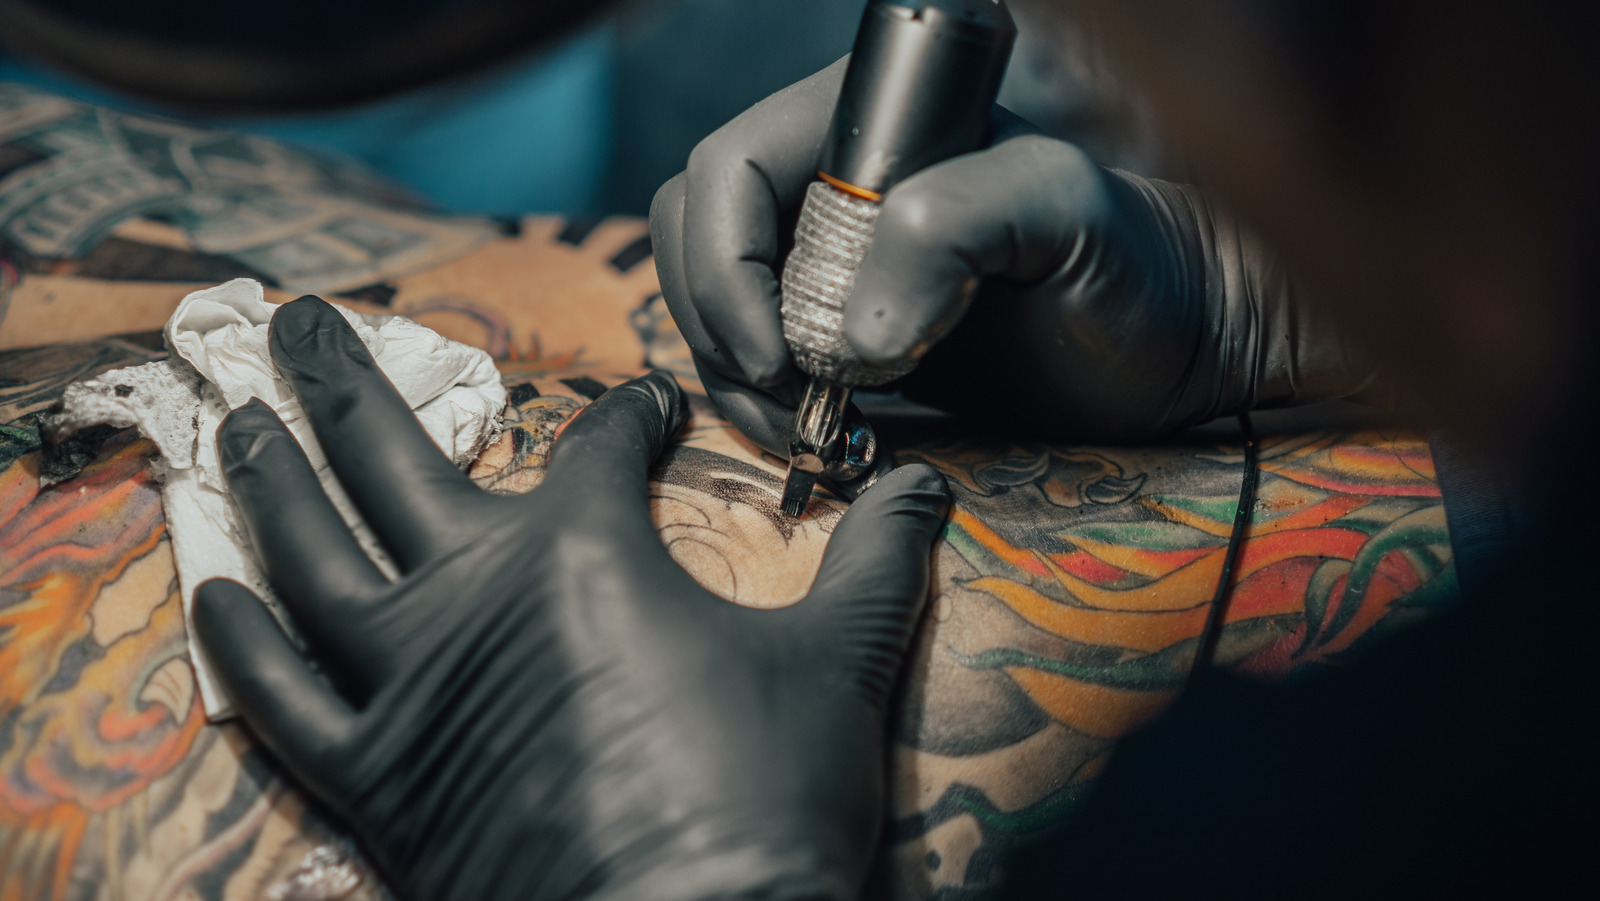 Woman Says She was Scammed out of $4,000 by Tattoo Artist